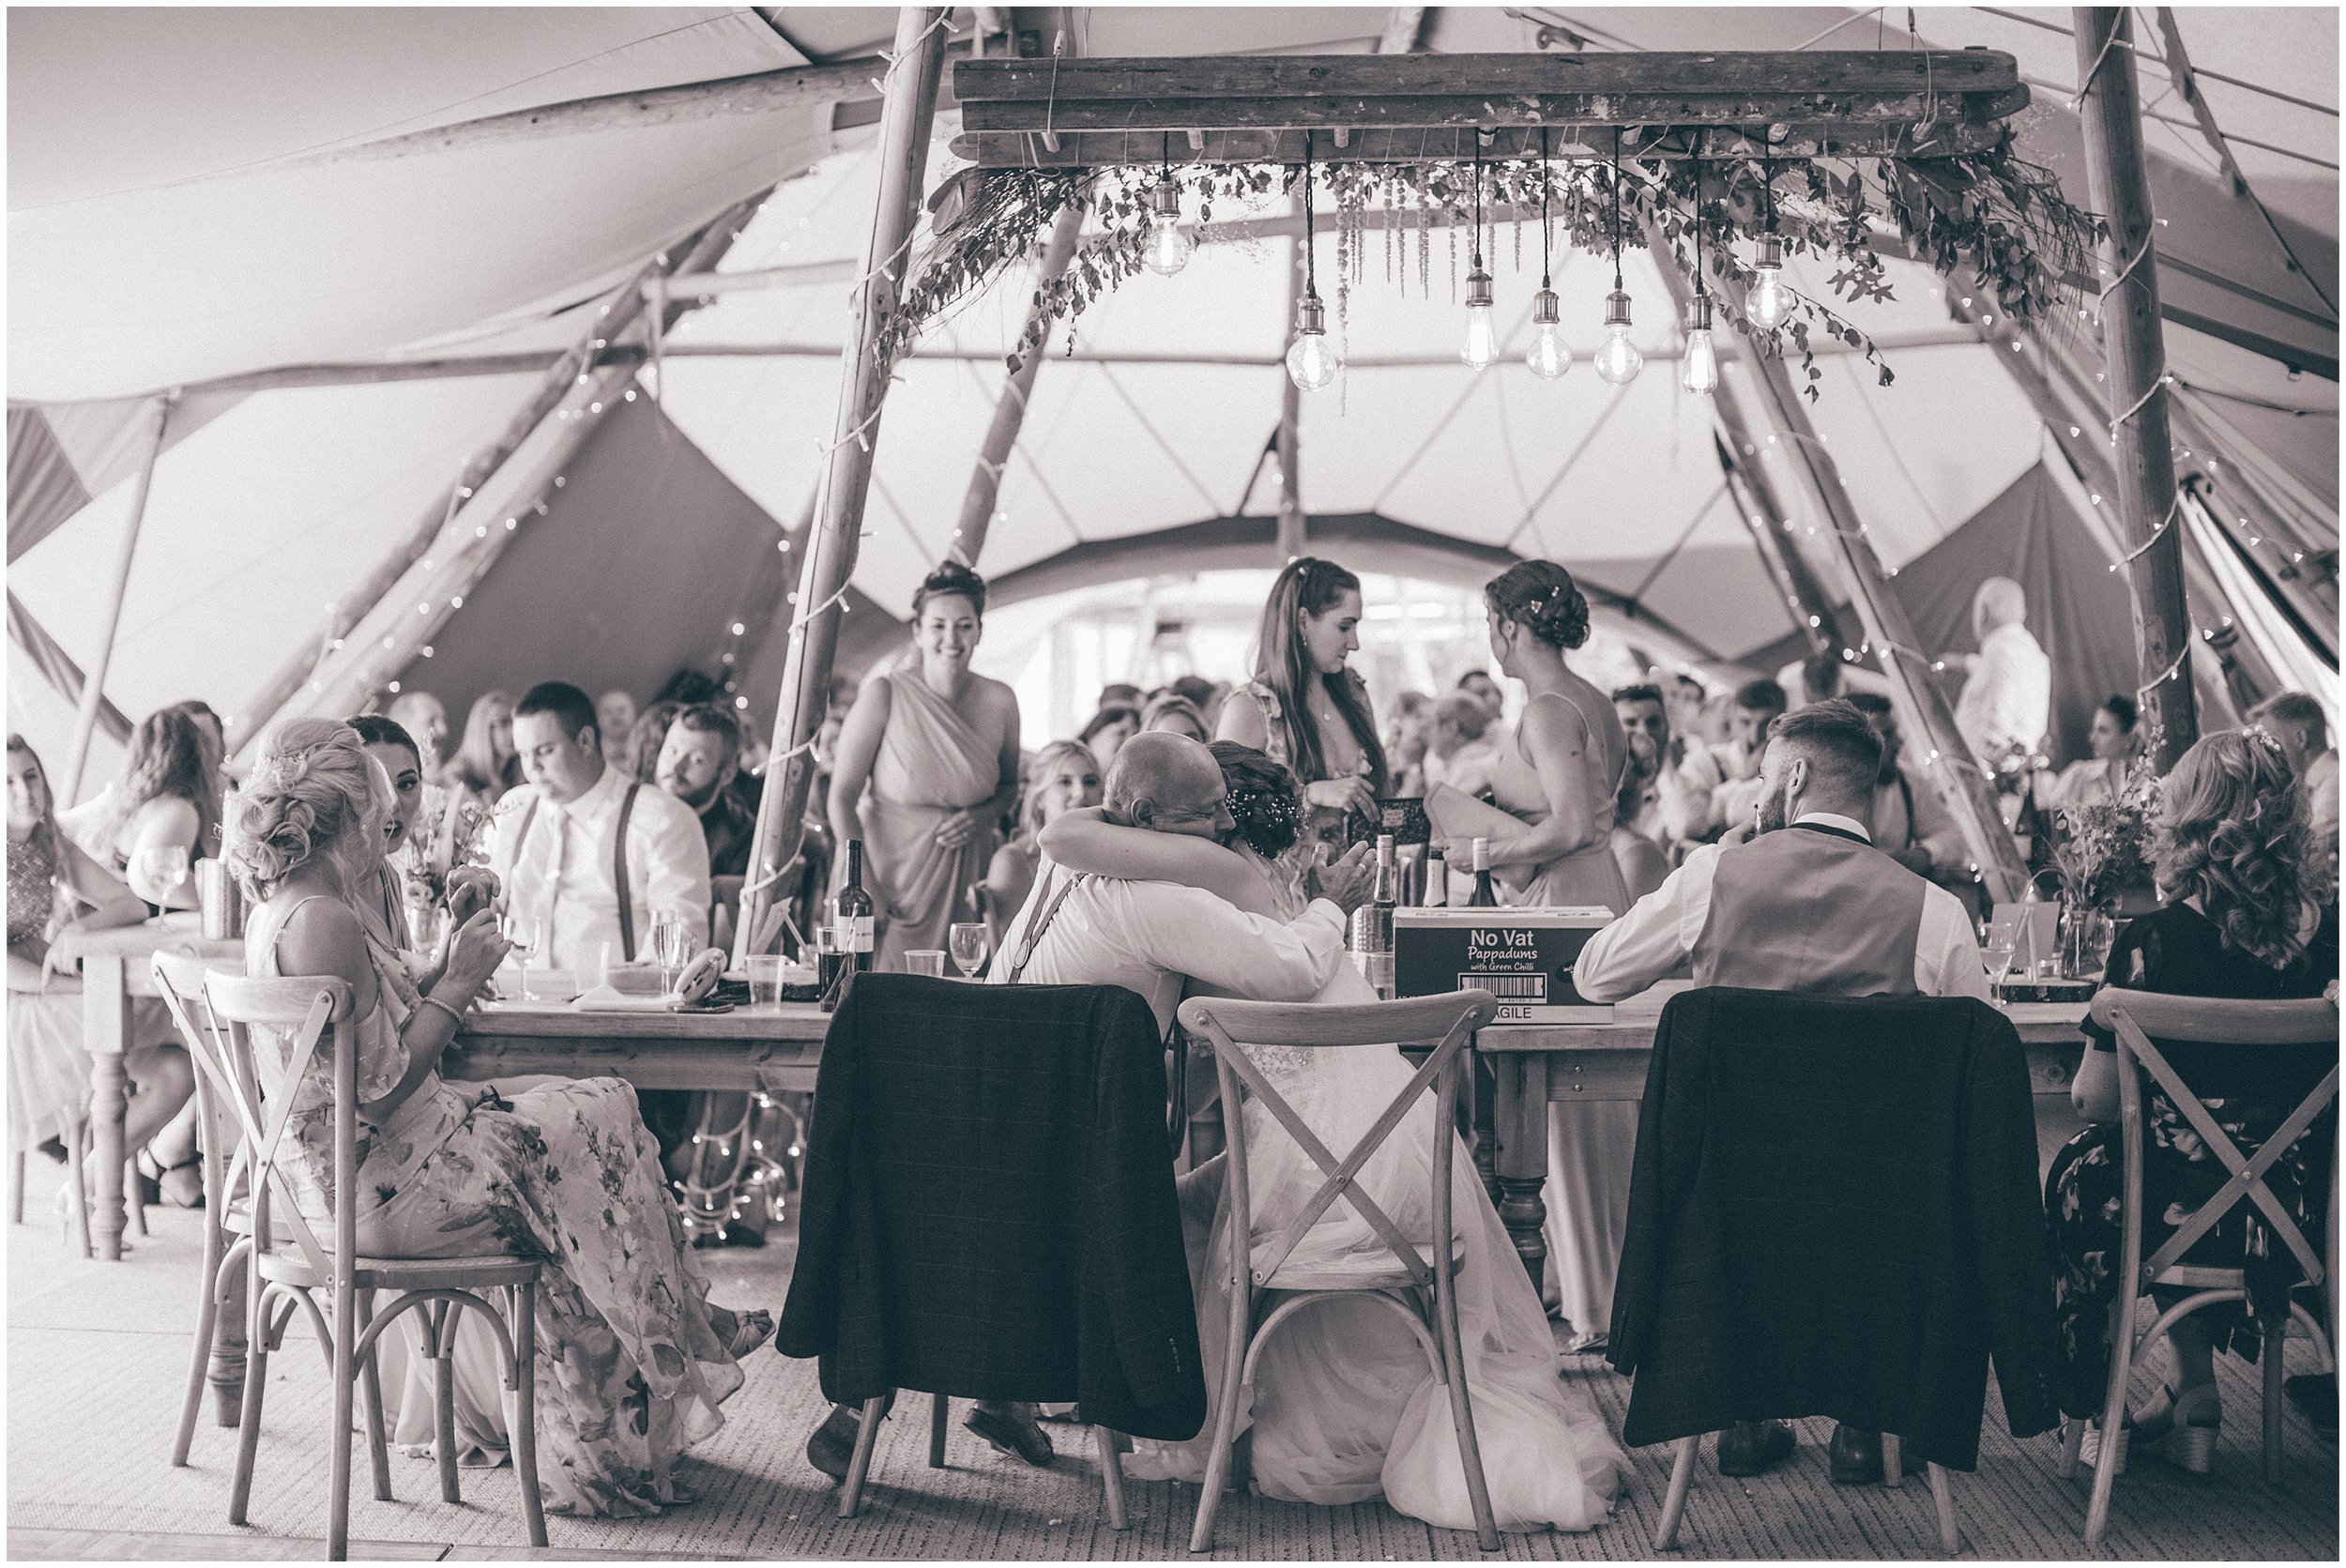 Wedding speeches in the tipi at a summer wedding at Skipbridge Country Wedding venue in Yorkshire